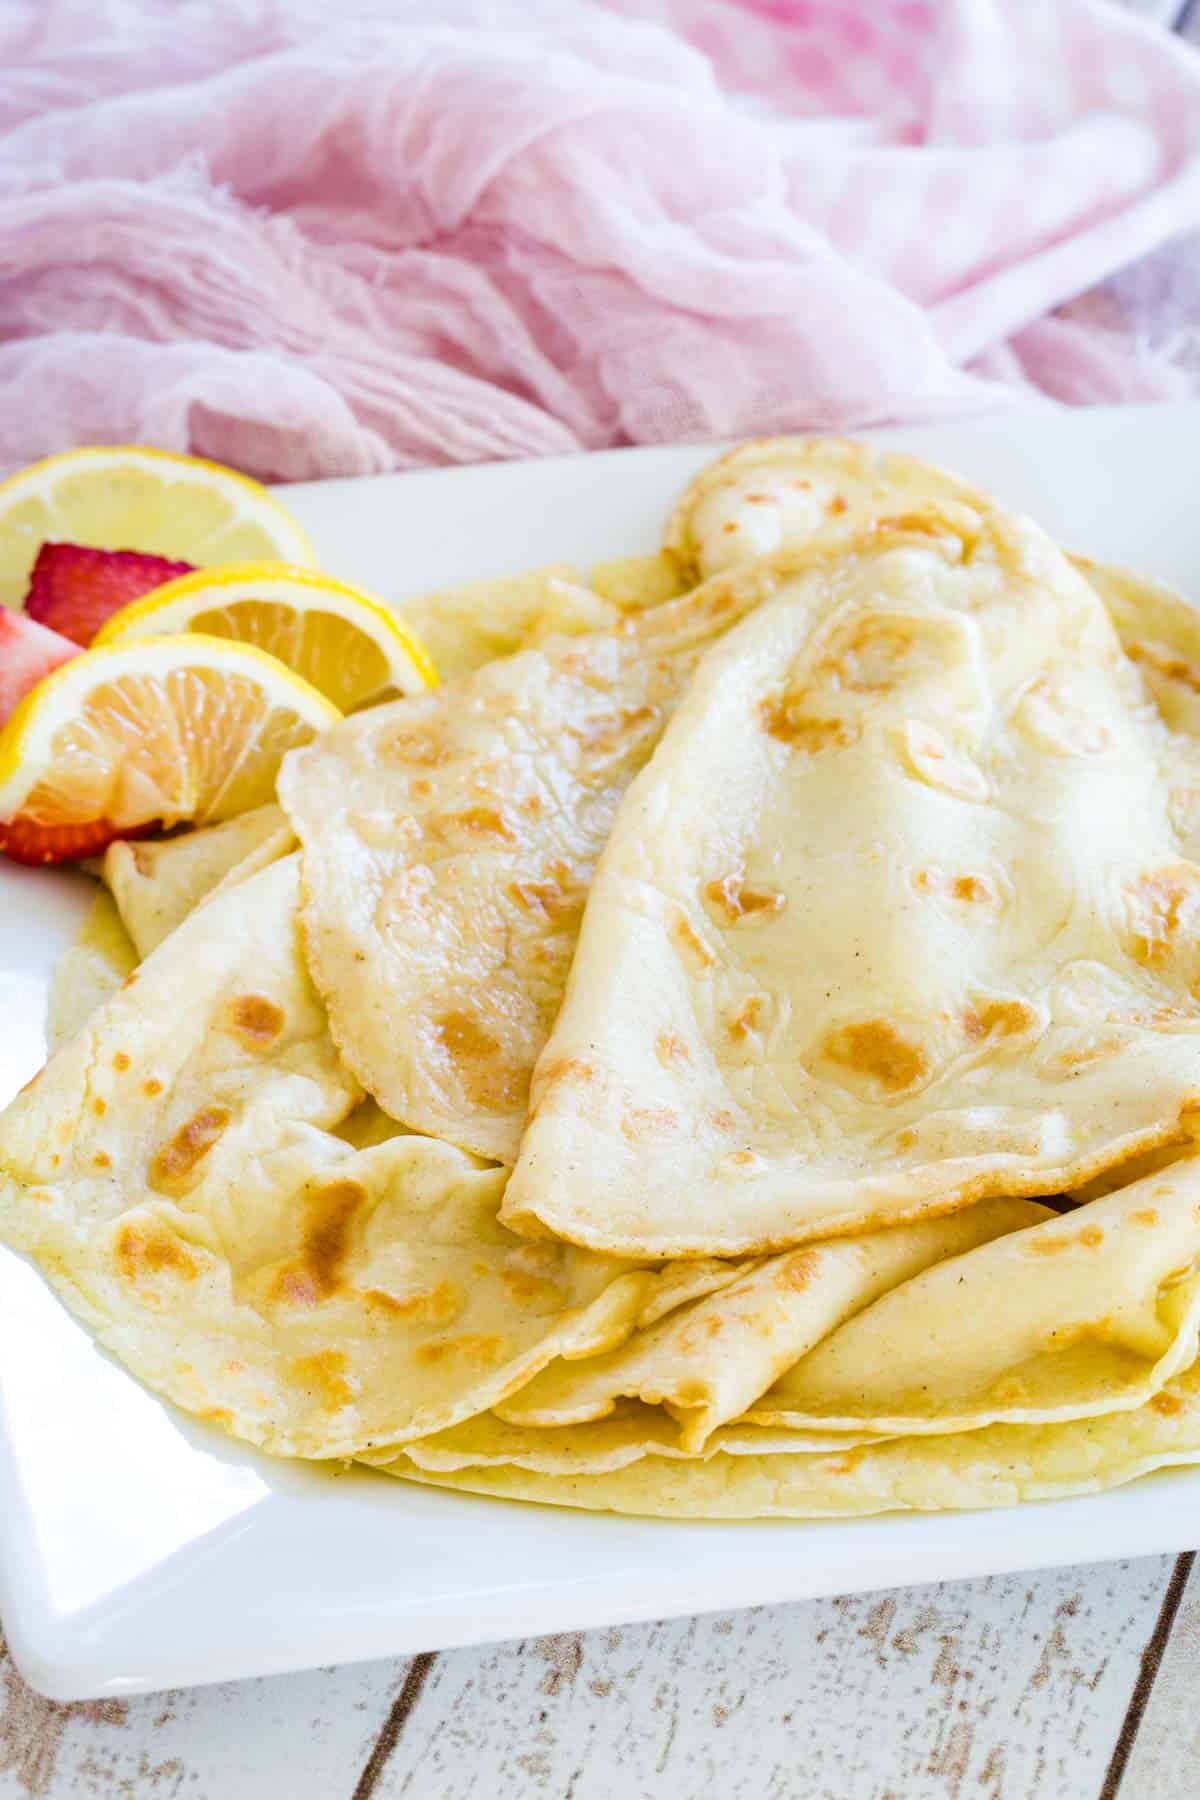 Crepes piled up on a white plate with some strawberry and lemon slices.